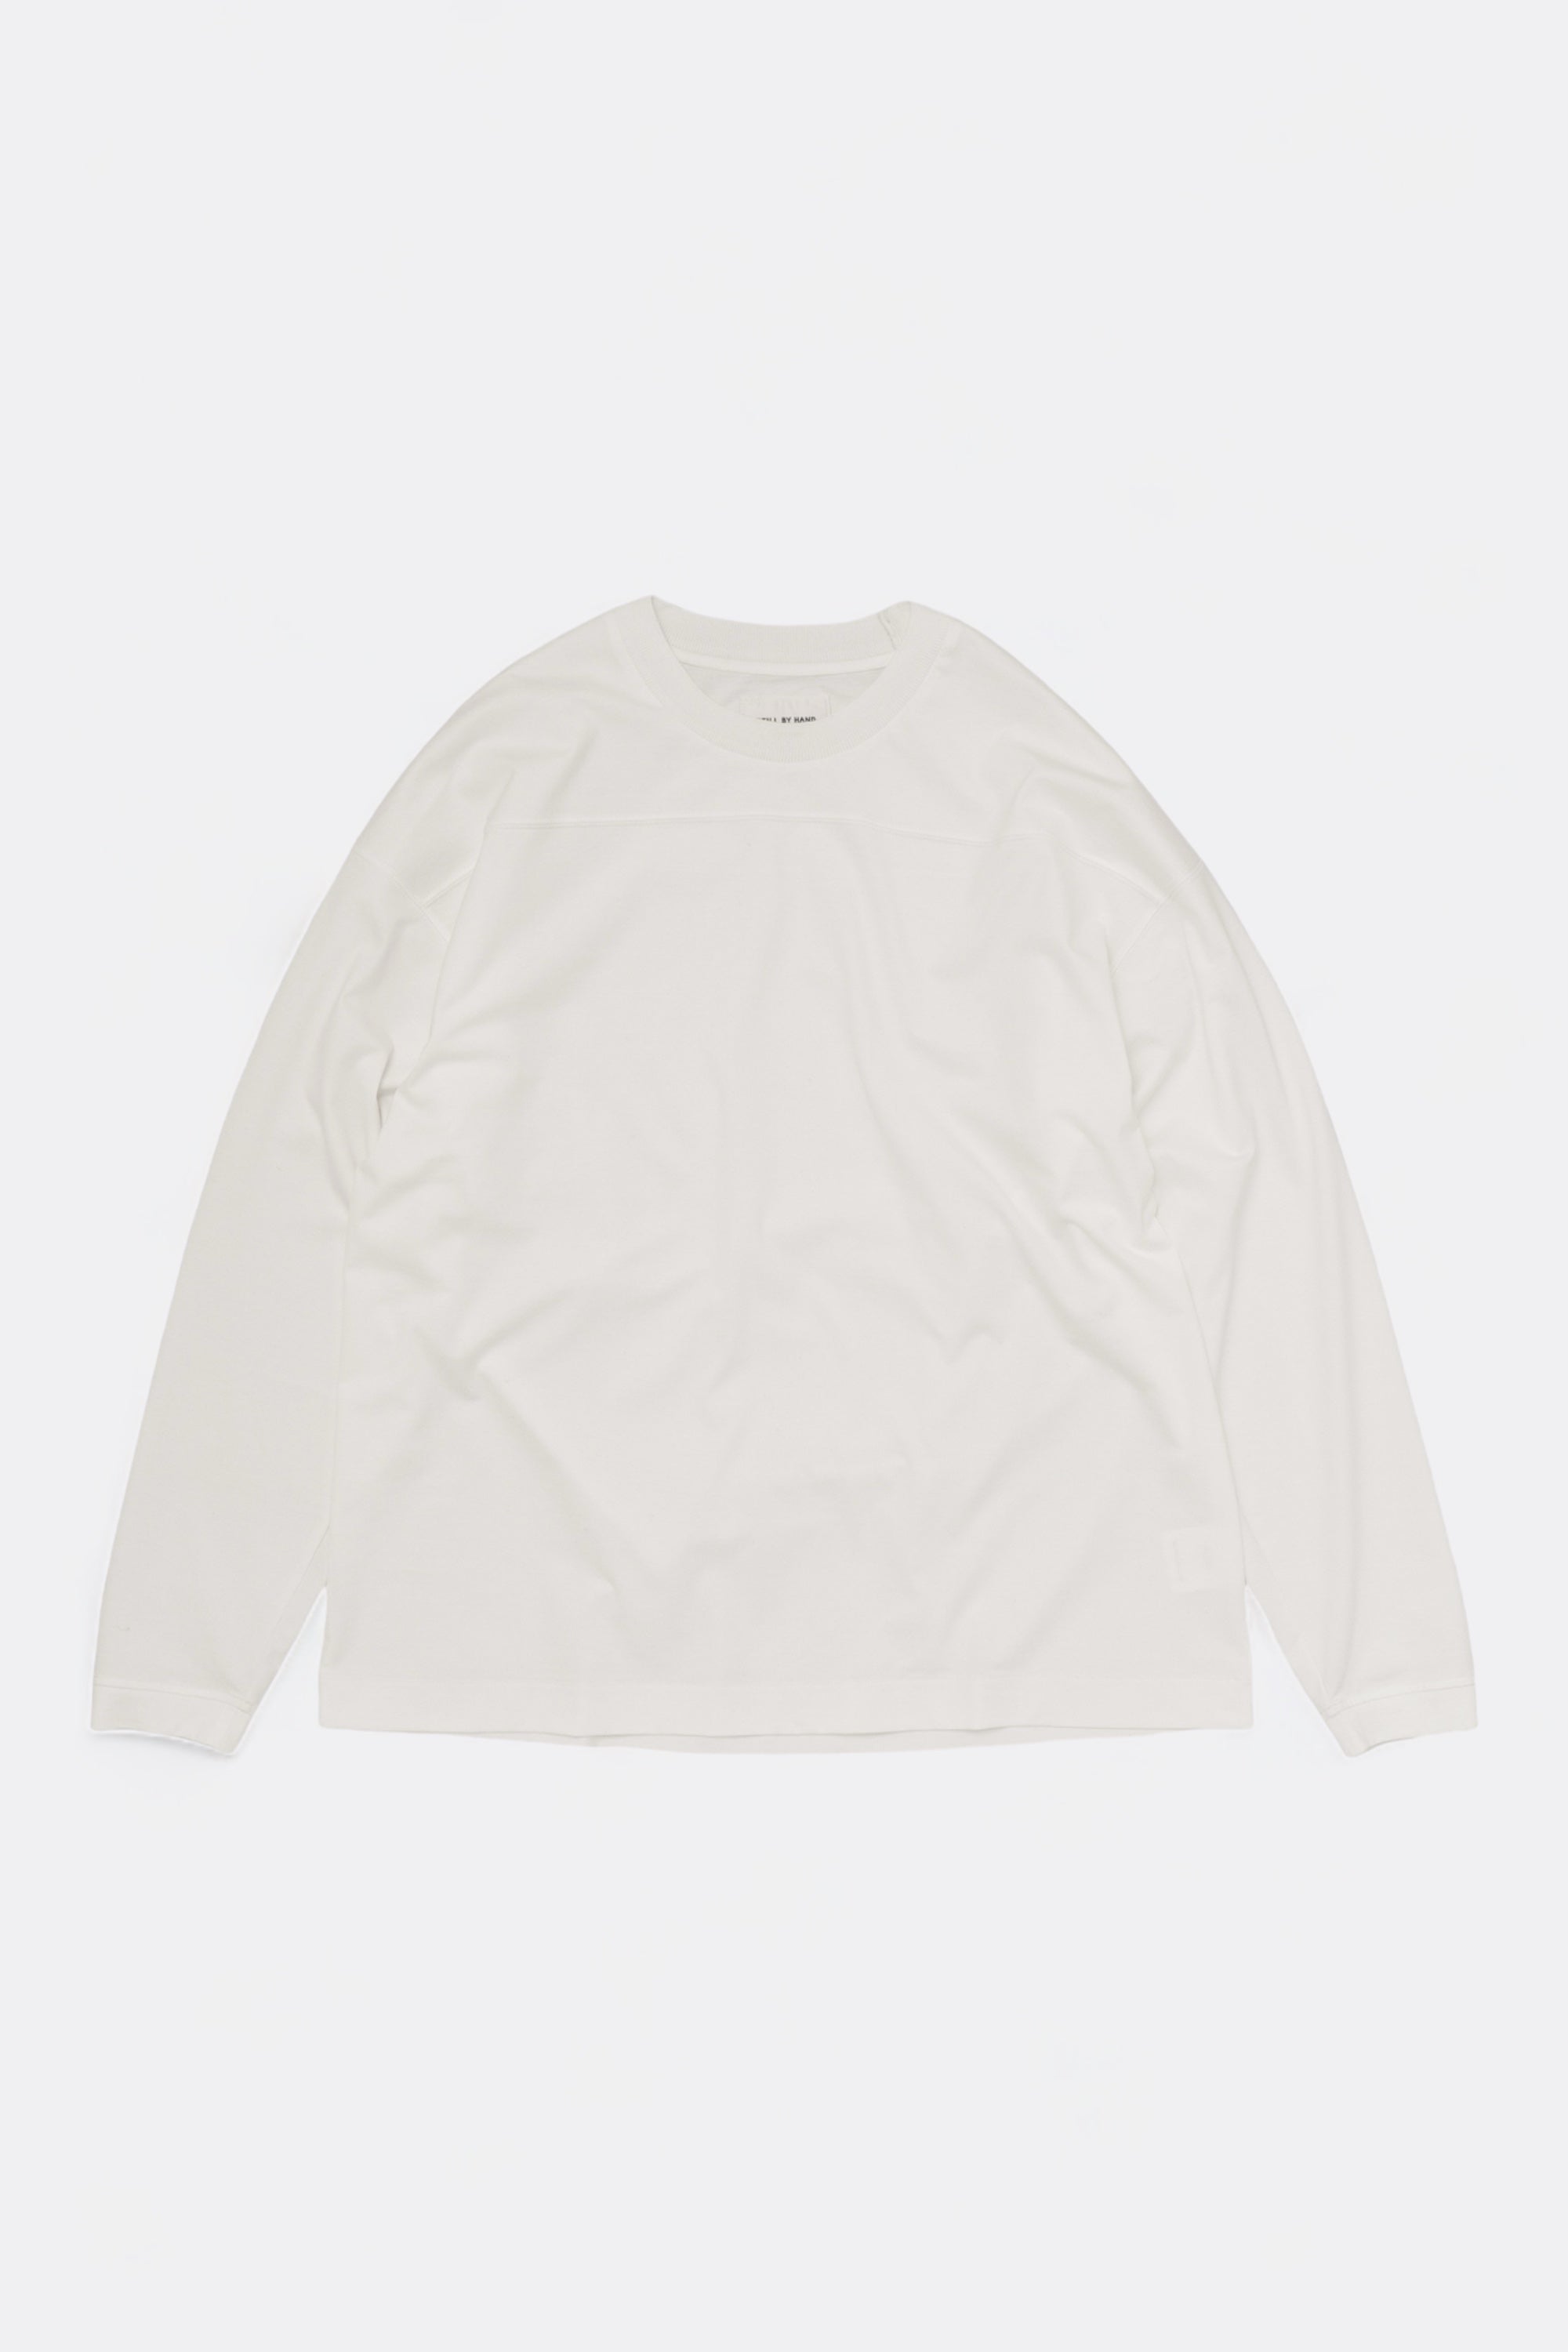 Still By Hand - Knitted Rib Long Sleeve (White)